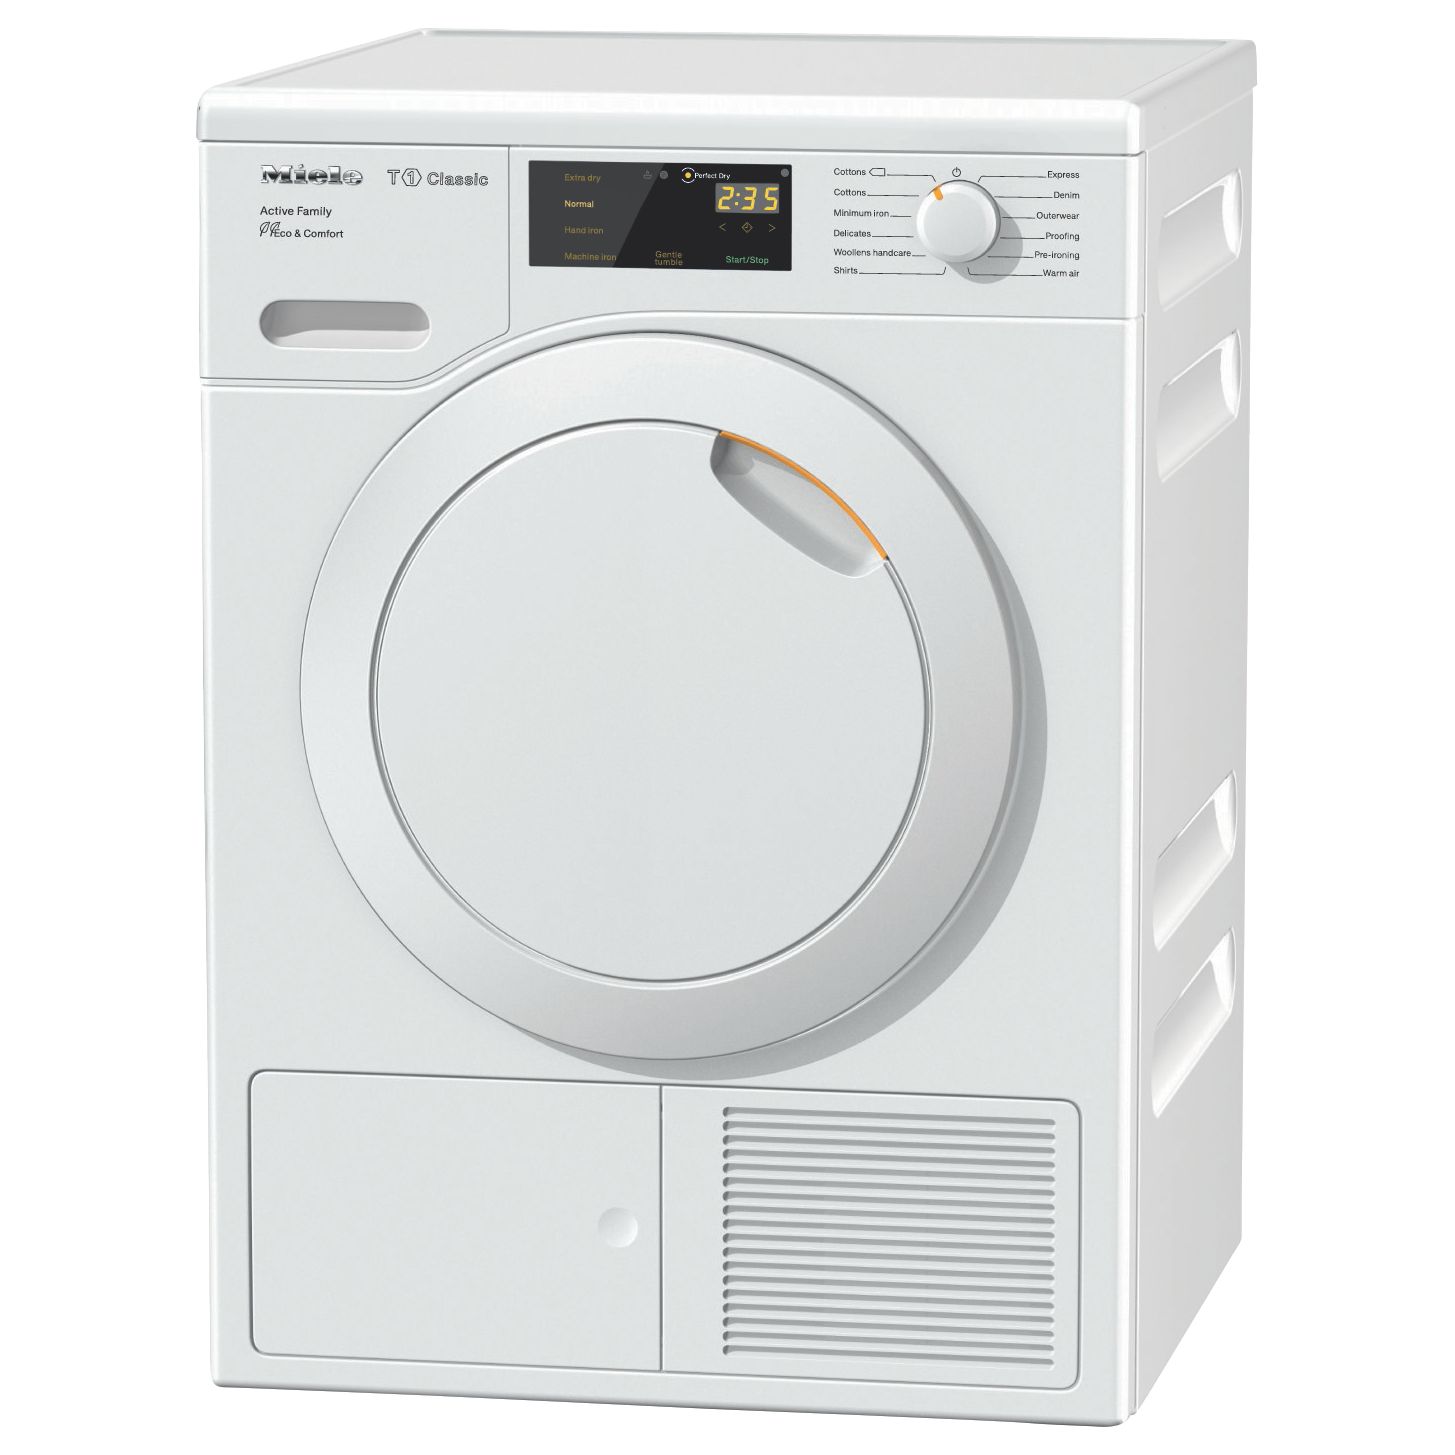 Miele TDD220WP Heat Pump Tumble Dryer, 8kg Load, A++ Energy Rating, White